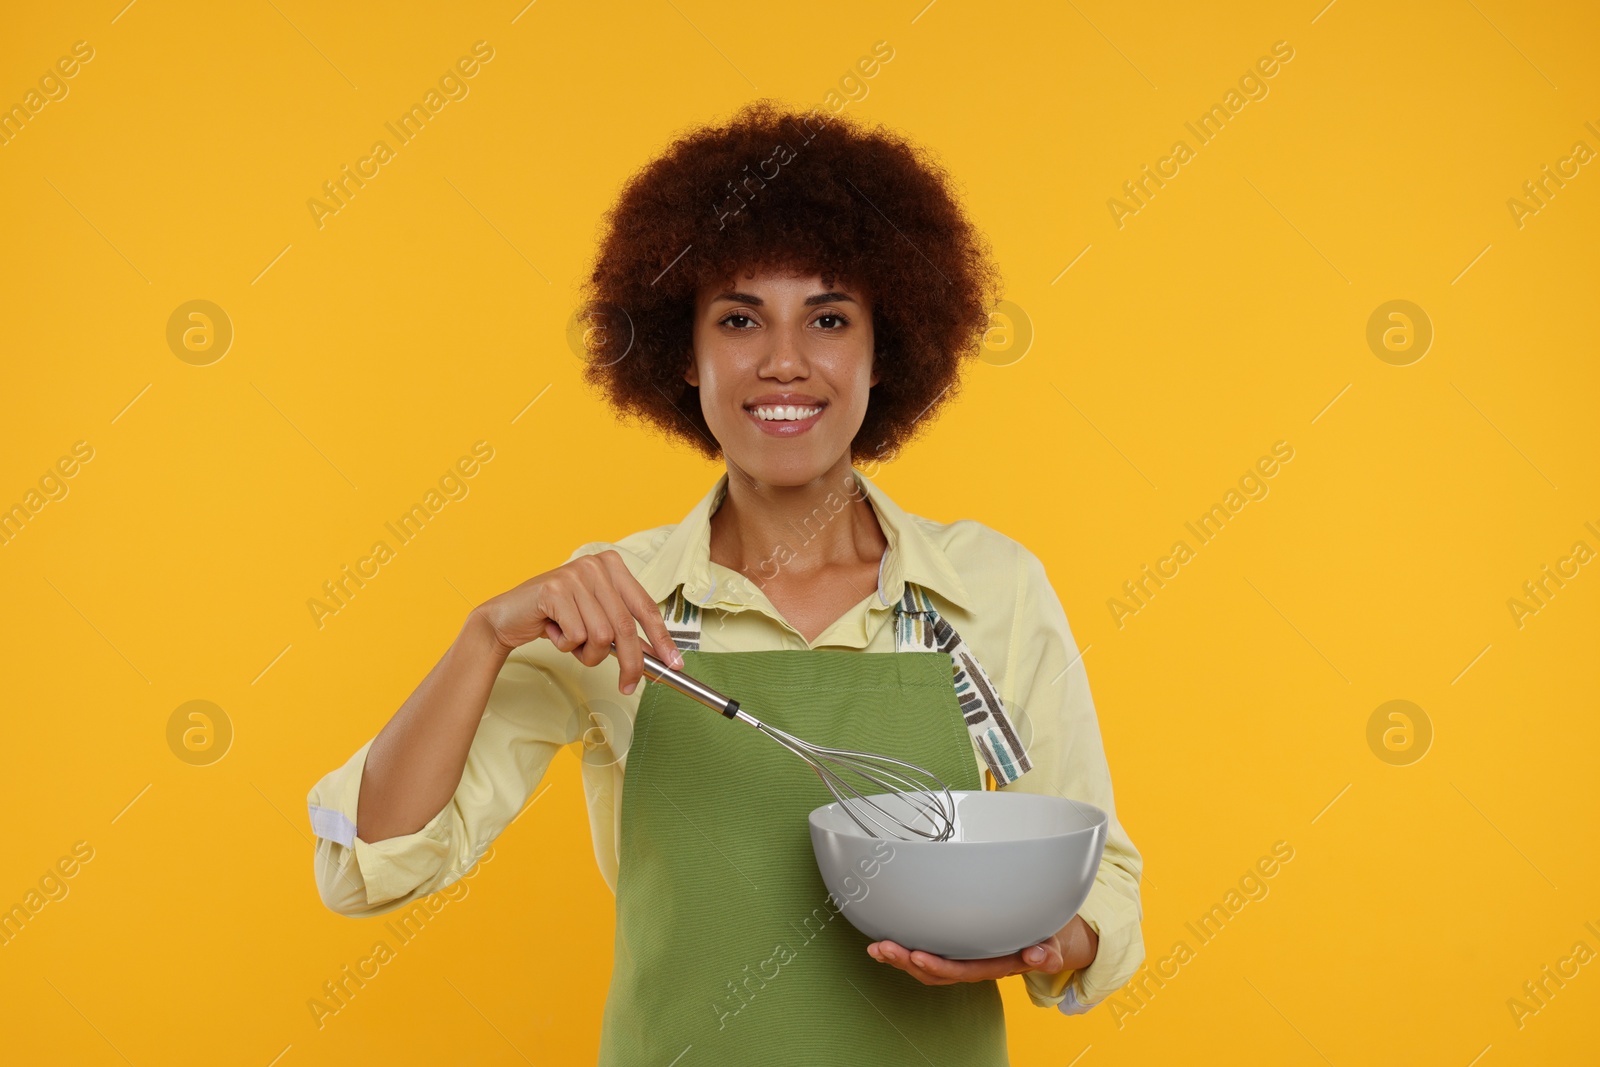 Photo of Happy young woman in apron holding bowl and whisk on orange background